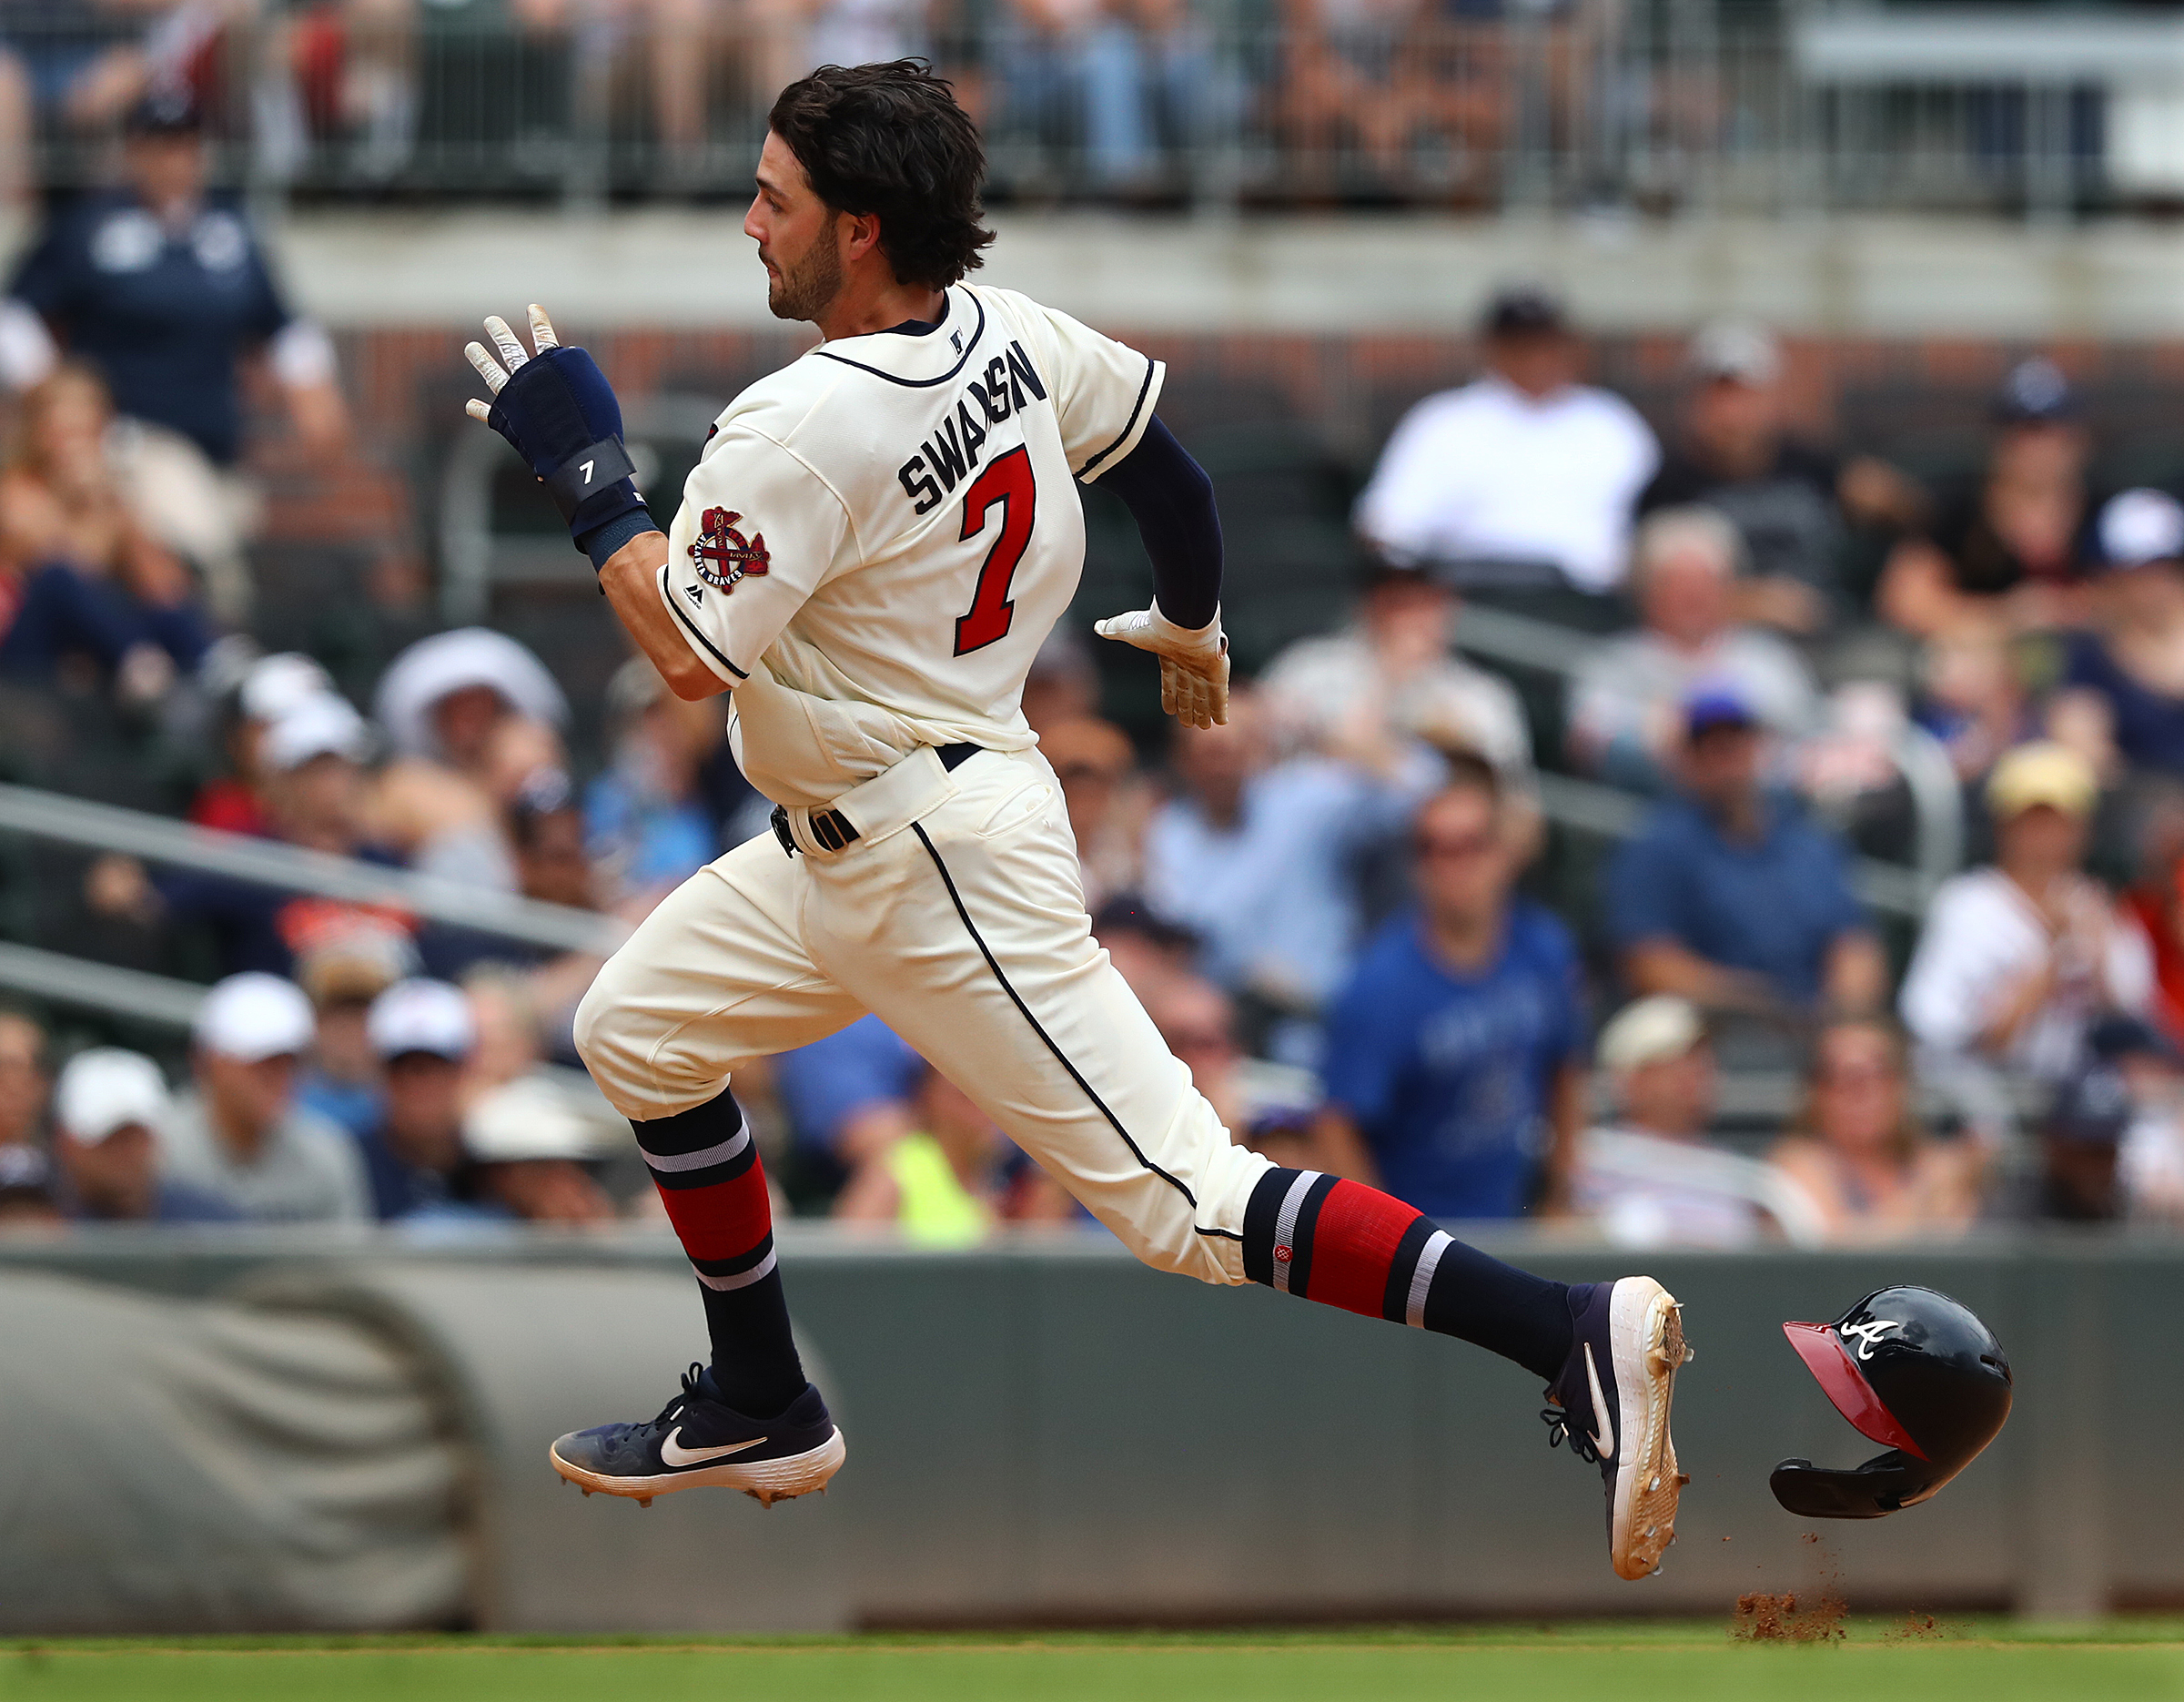 MLB - A new shortstop on the North Side. Dansby Swanson